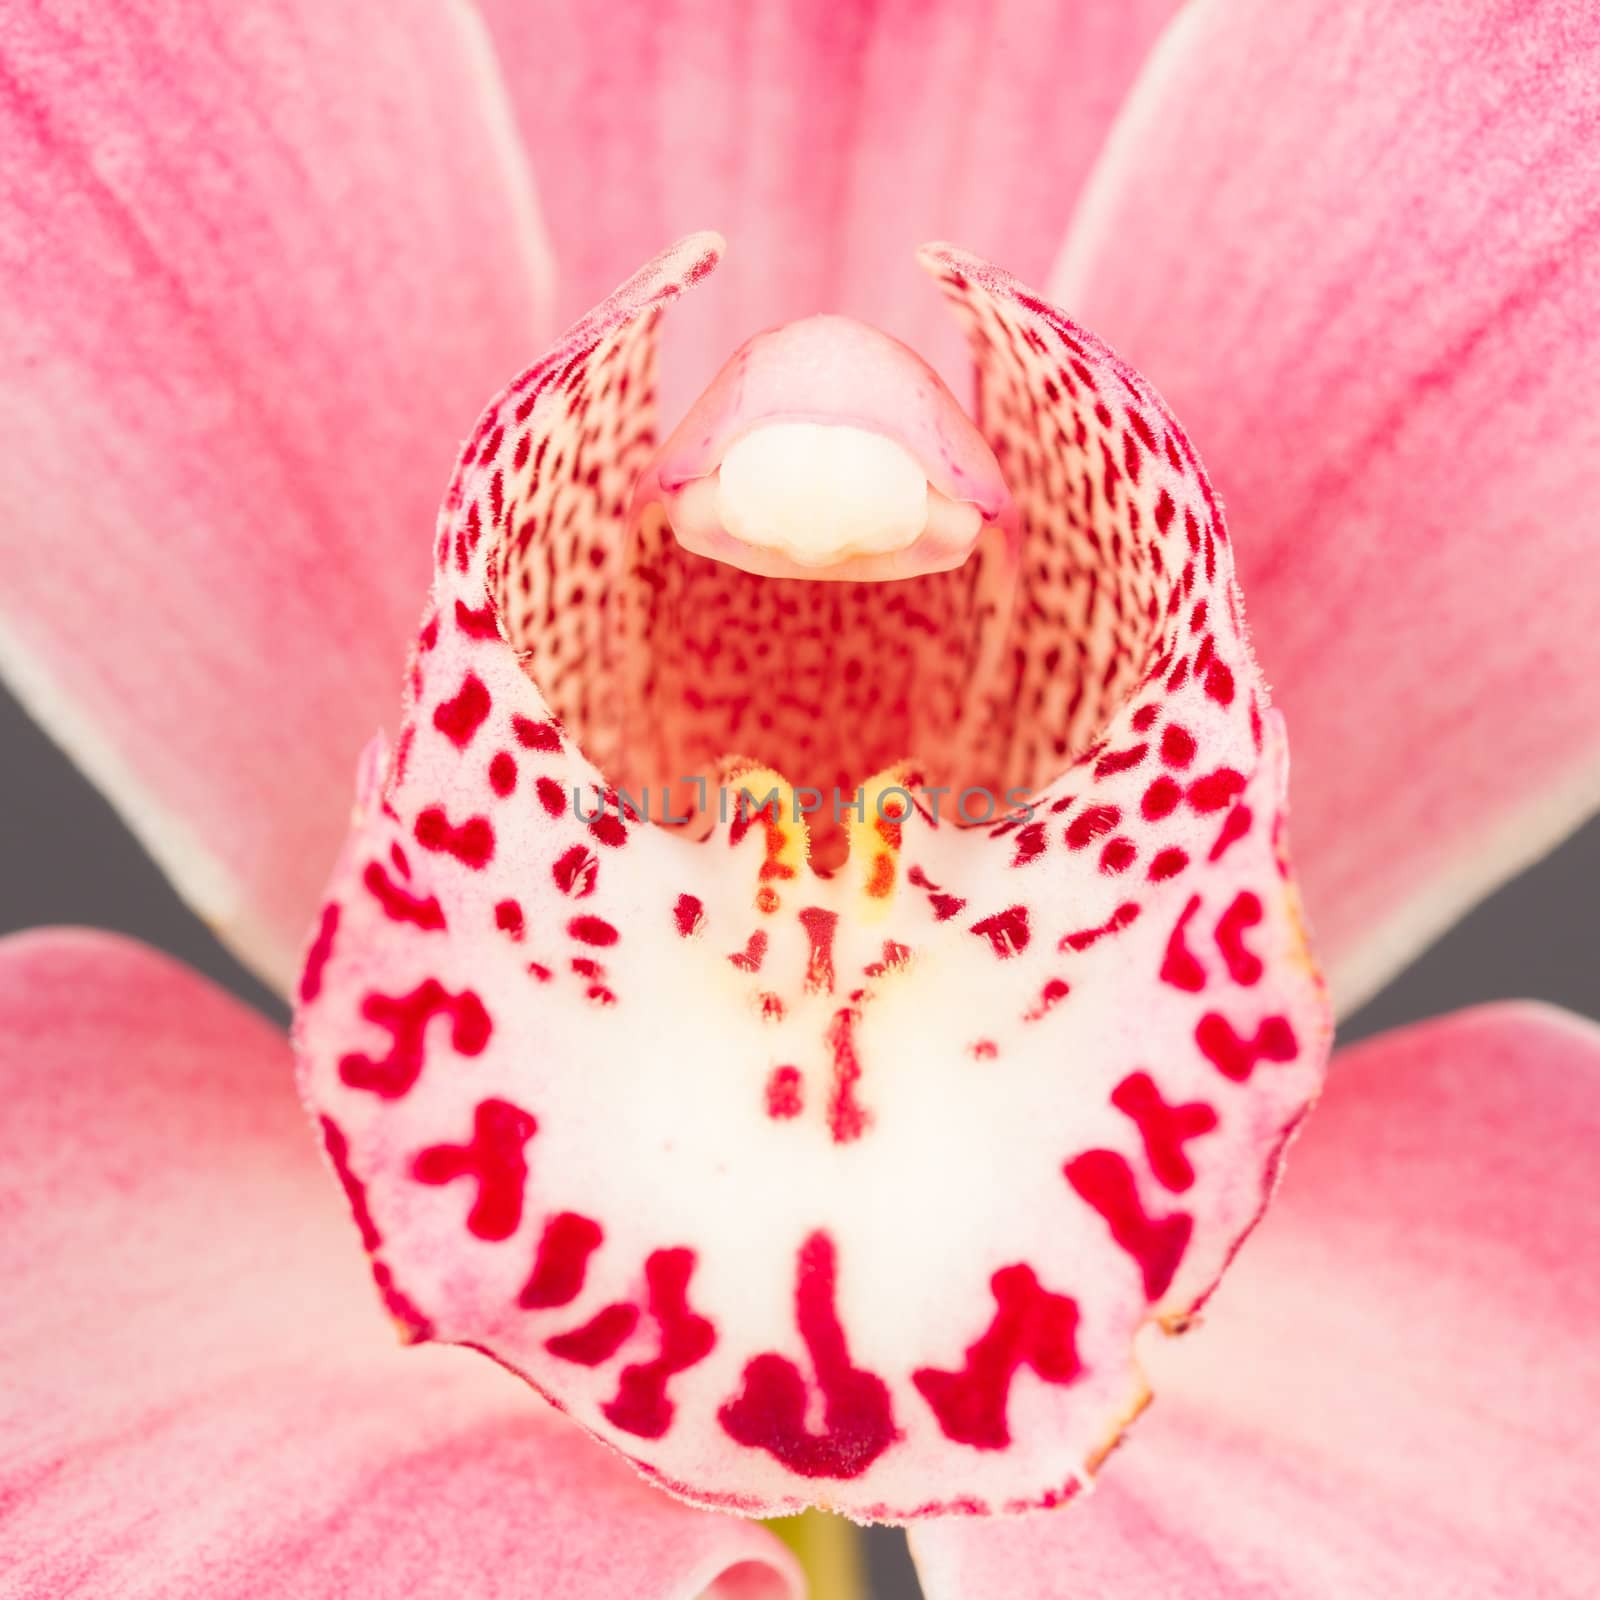 Colorful pink orchid by michaklootwijk